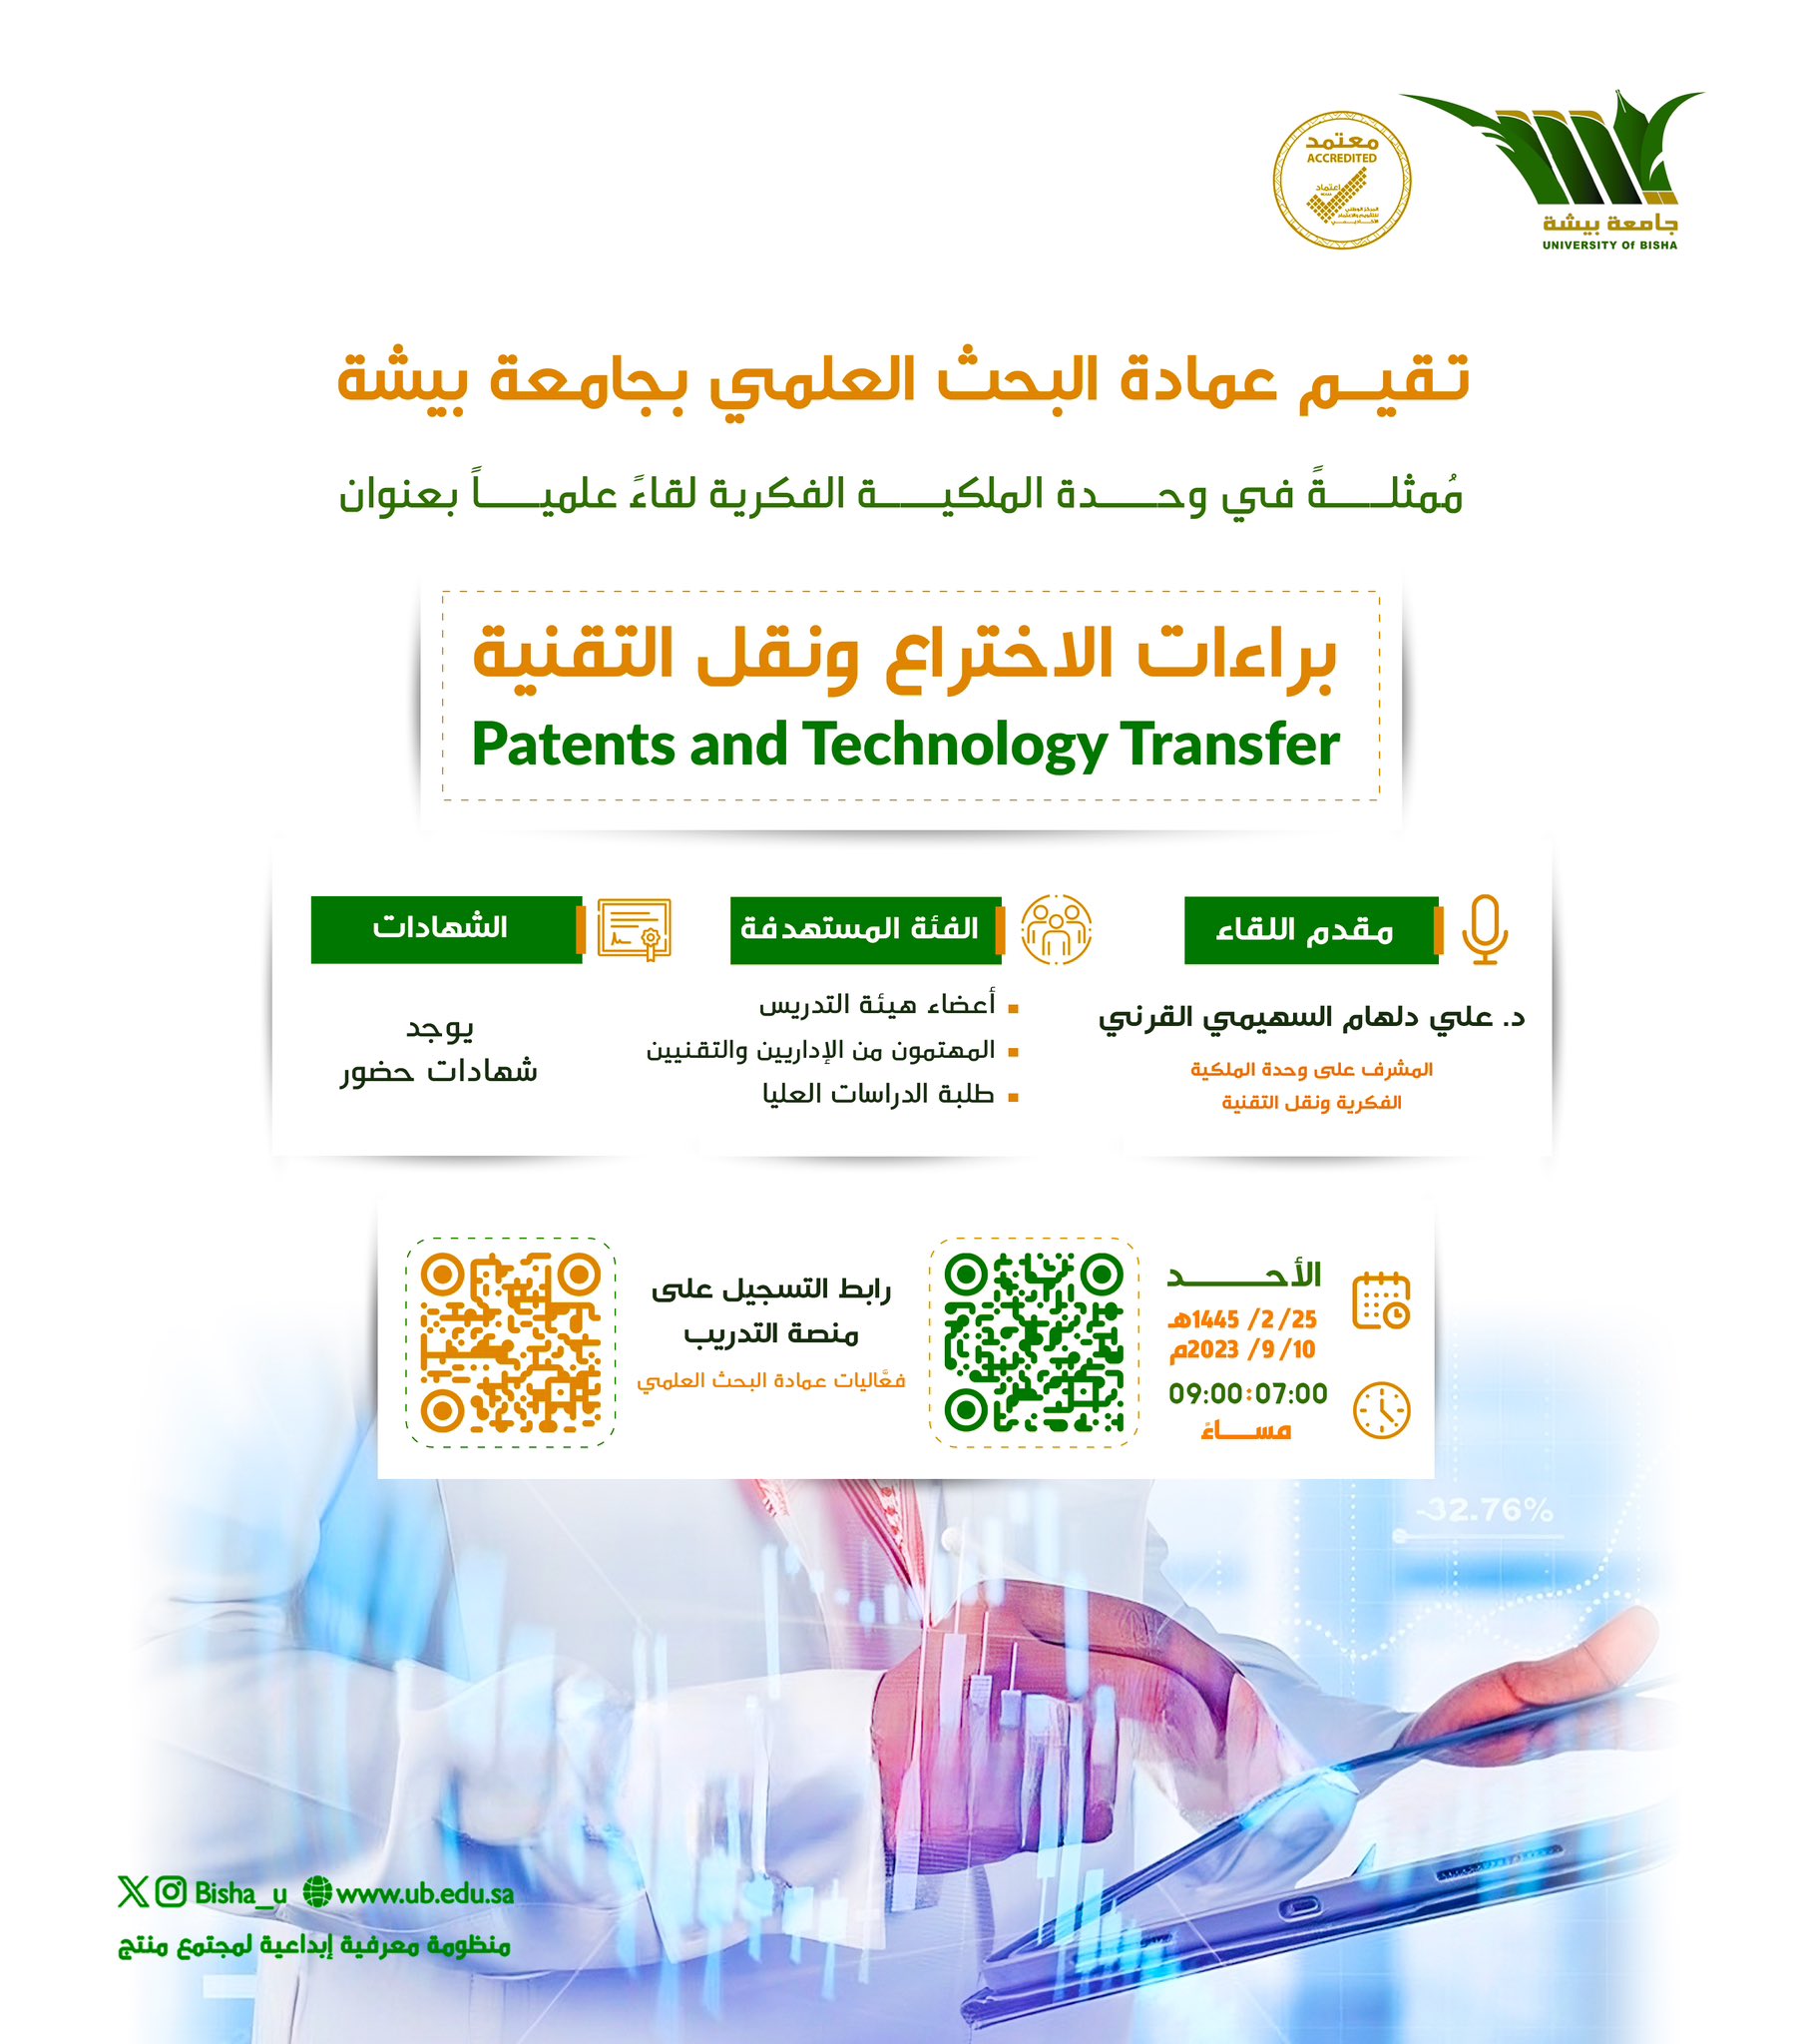 Deanship of Scientific Research organizes a Scientific Meeting entitled: Patents and Technology Transfer